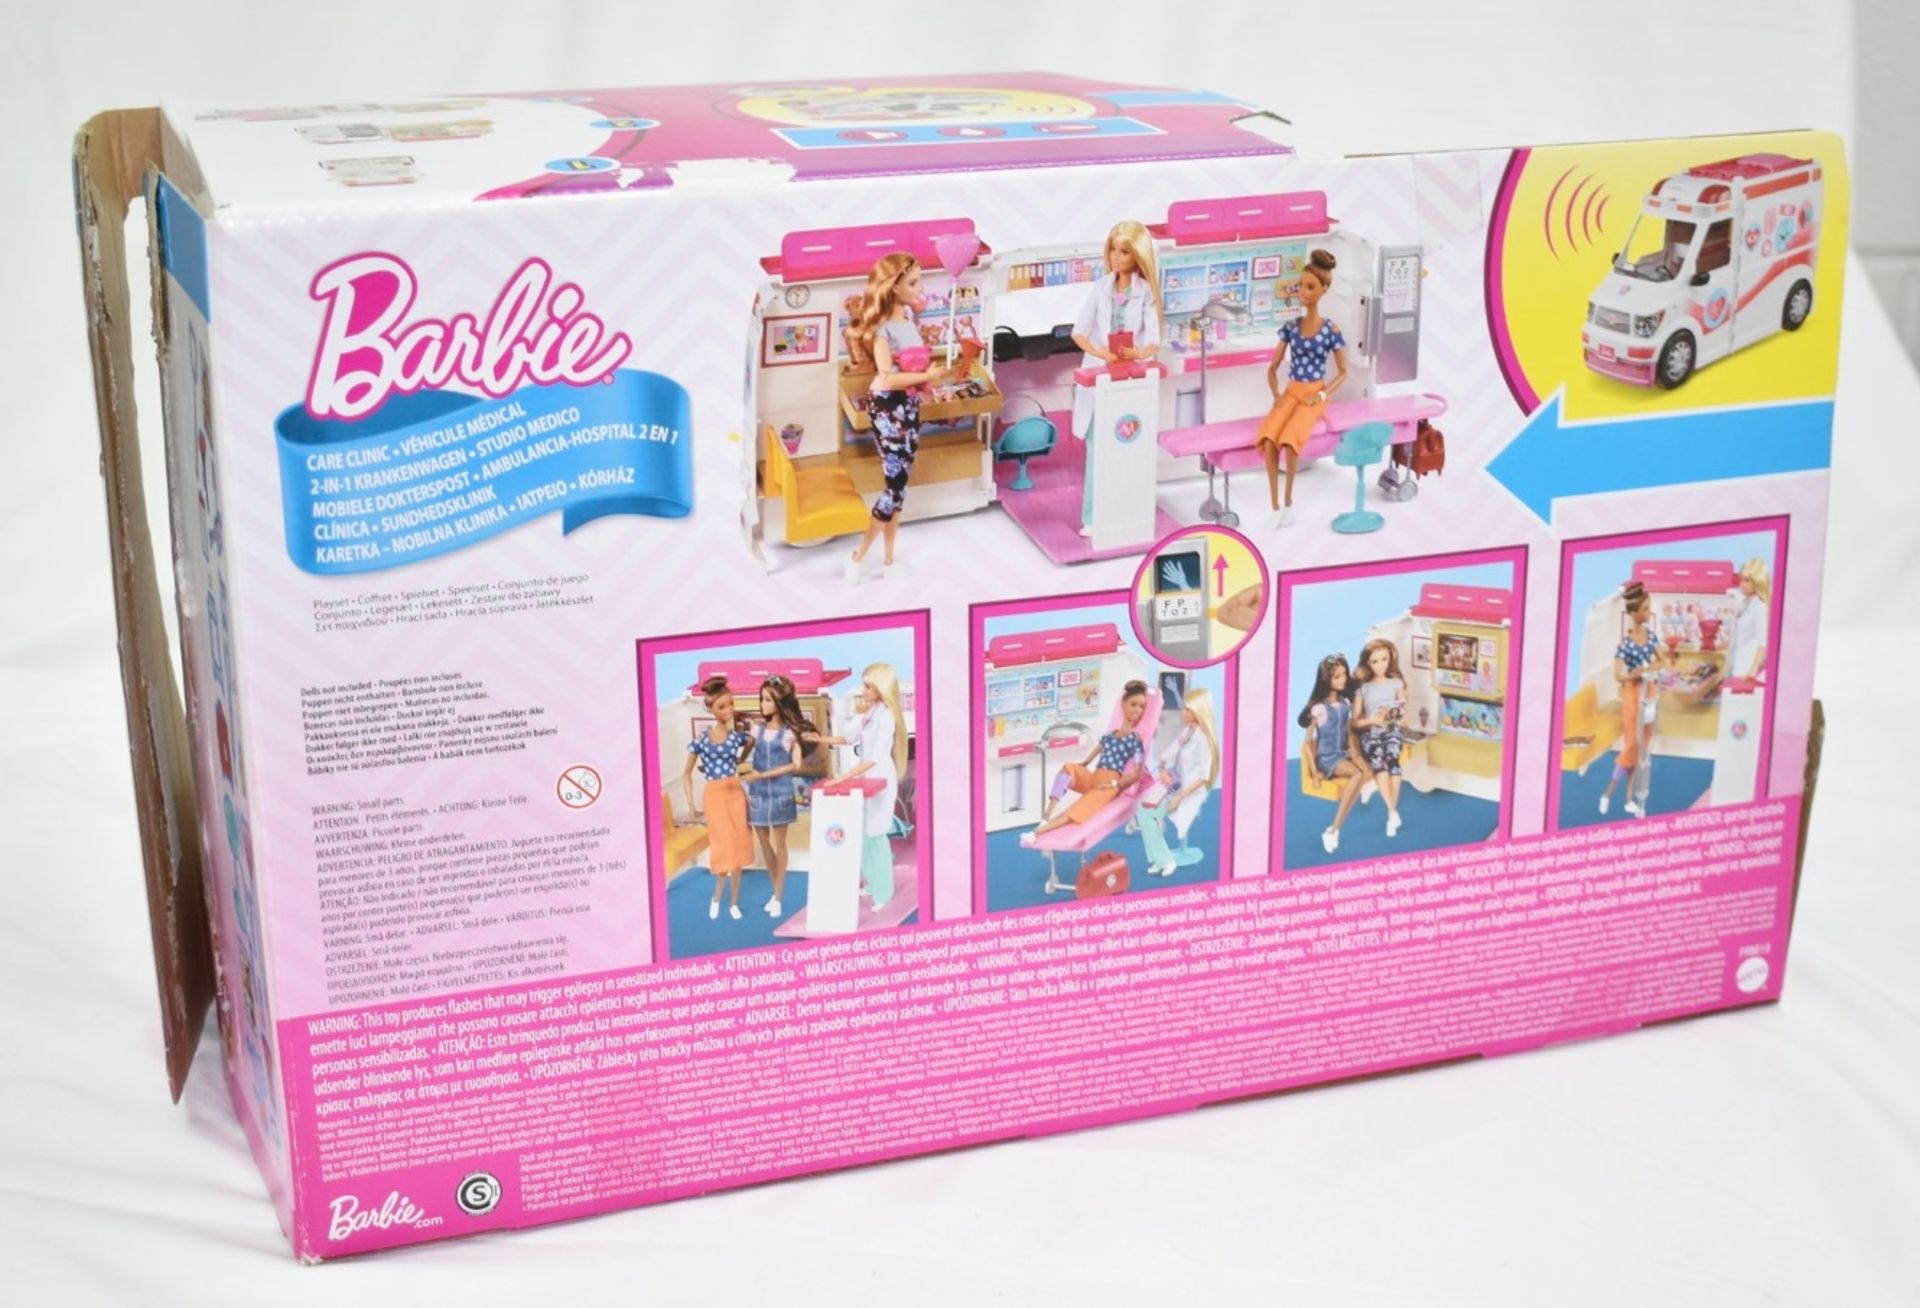 1 x BARBIE Care Clinic Playset With Siren Lights and Sound - Original Price £62.95 - Boxed Stock - Image 5 of 11